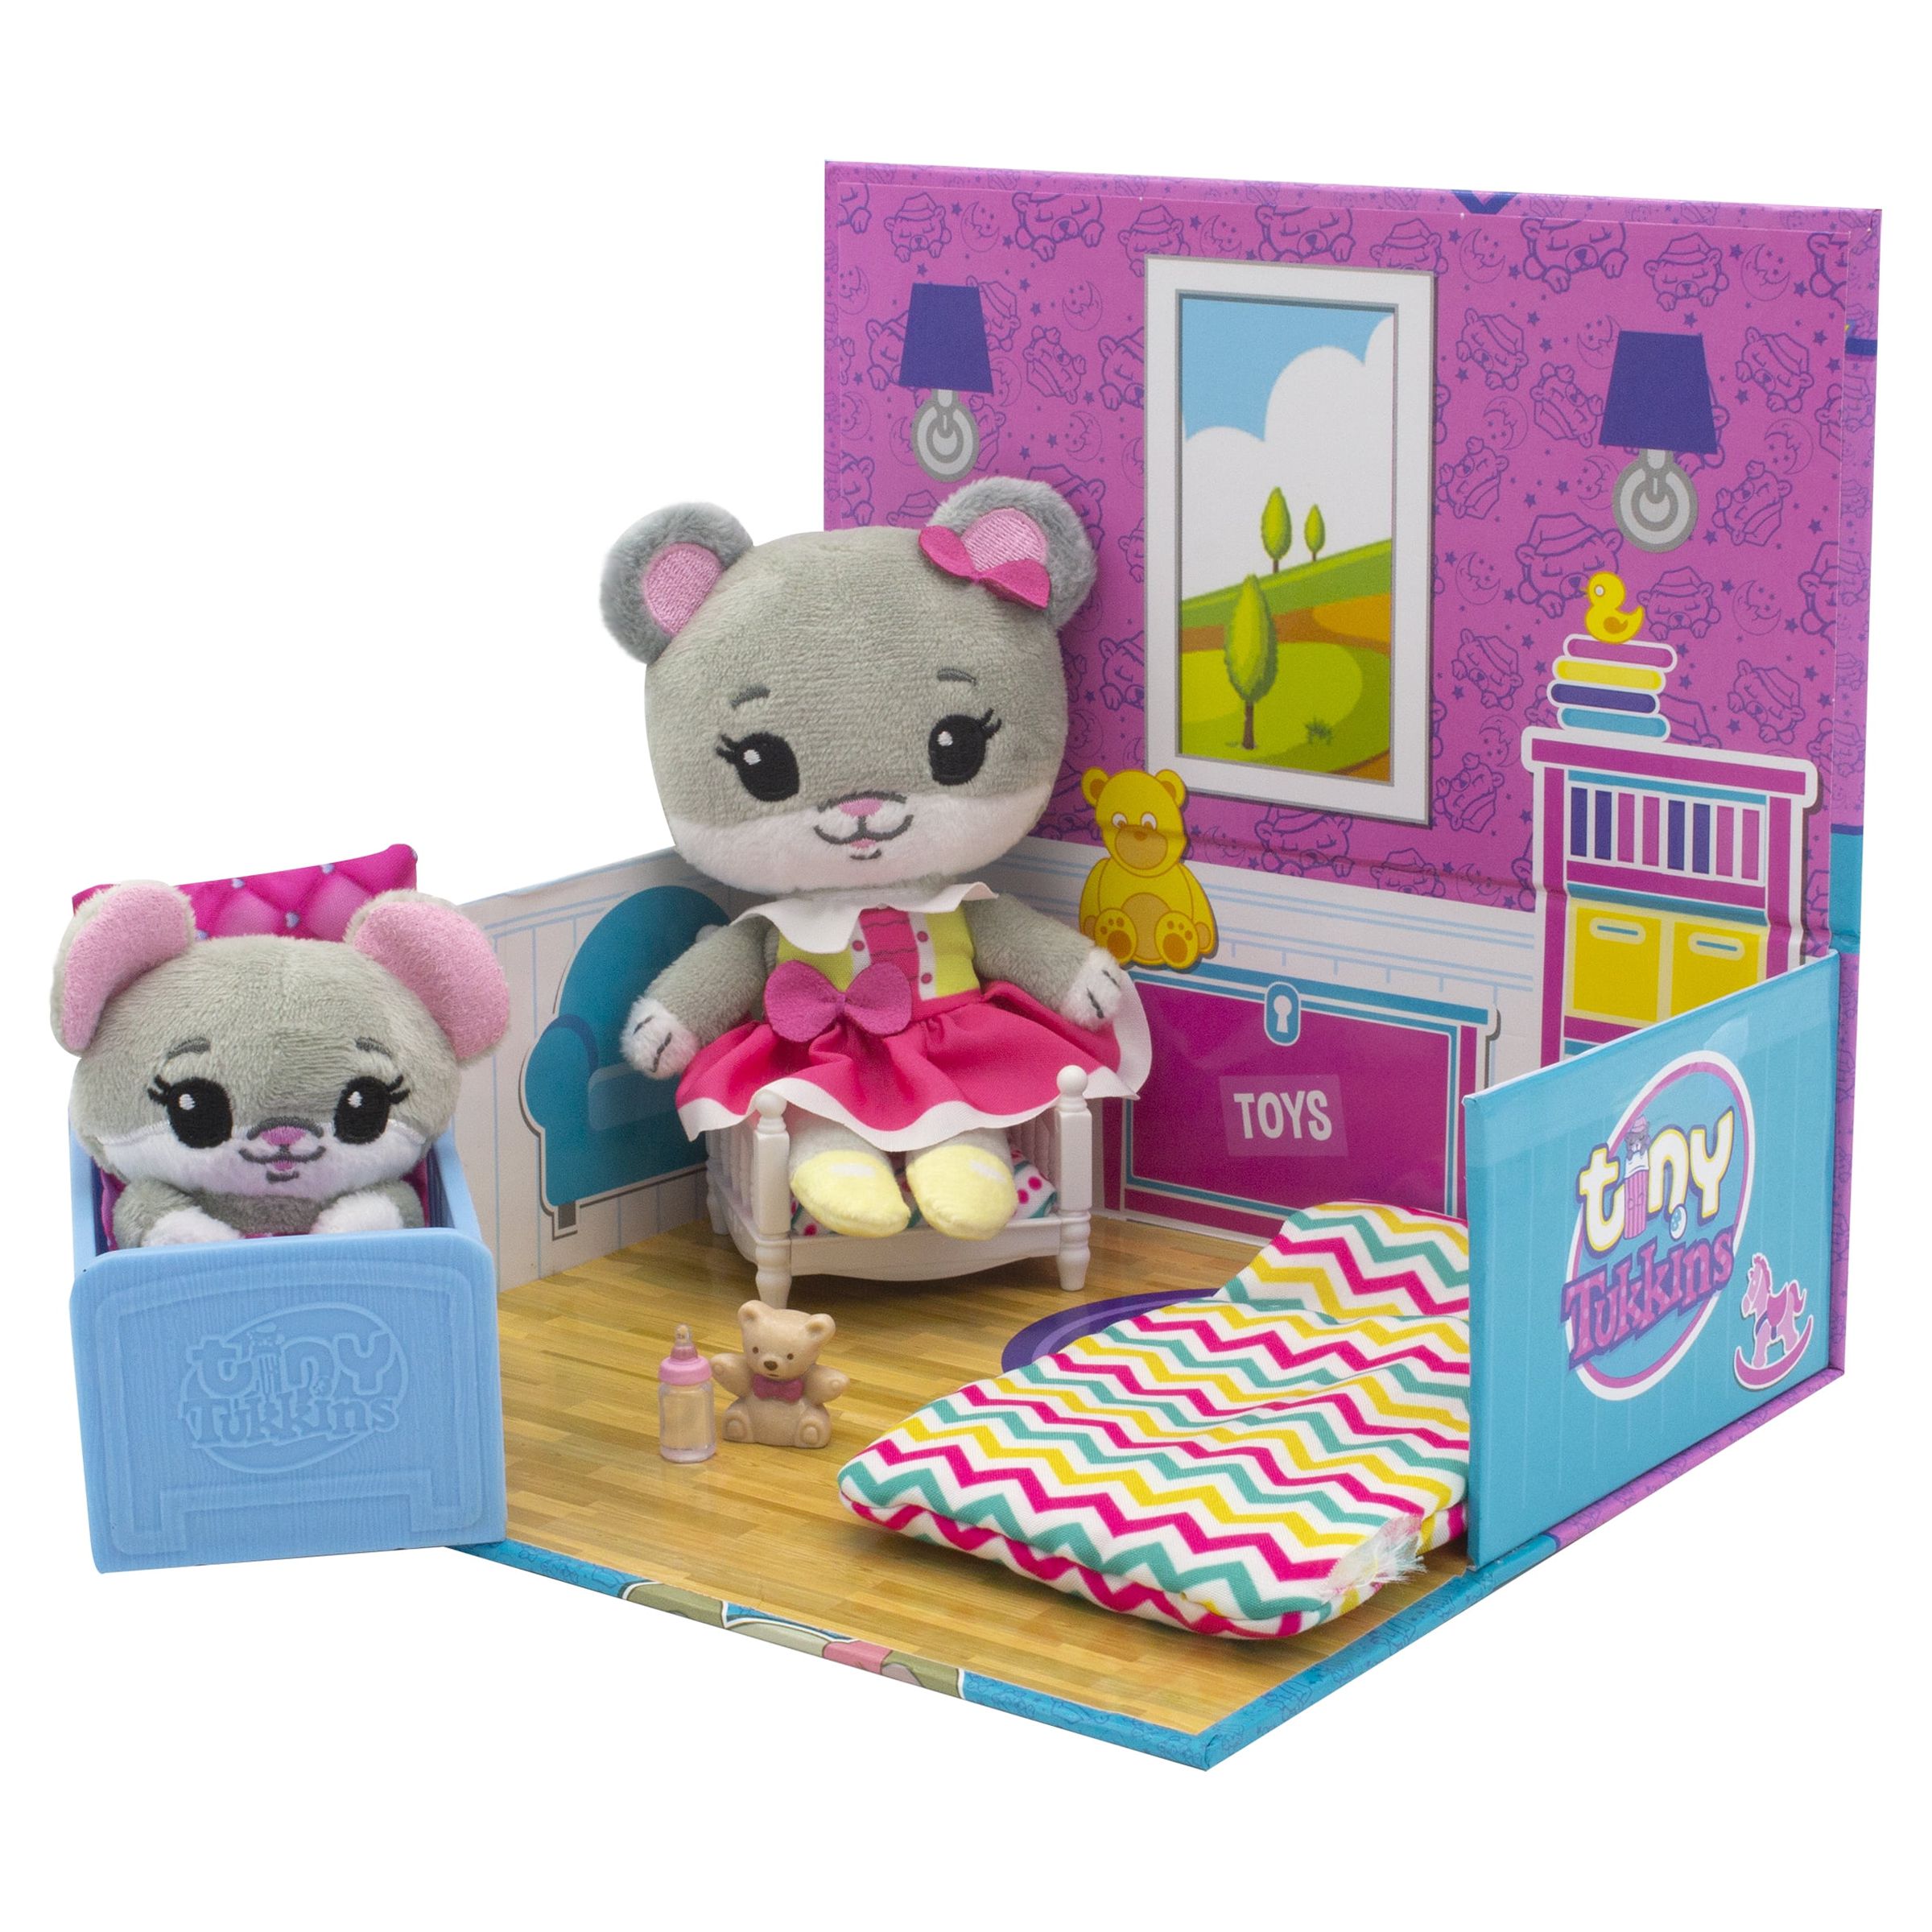 Tiny Tukkins Playset Assortment with Character Mouse Stuffed Animals - image 1 of 7